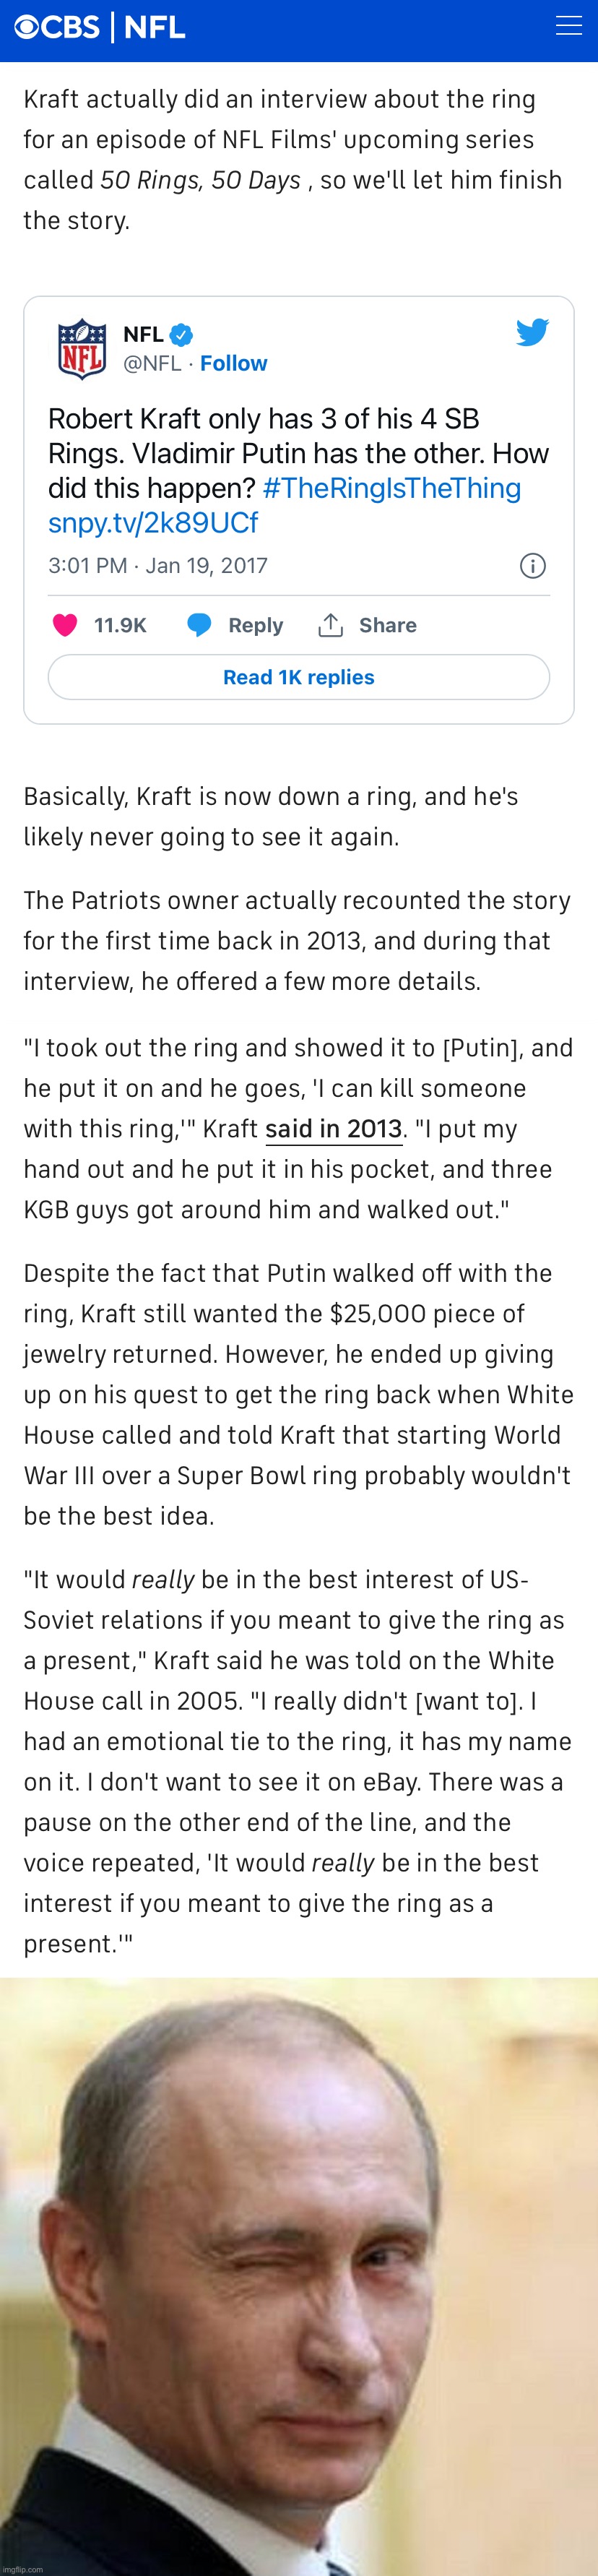 How Putin once made off with a Super Bowl ring tells you all you need to know about his rule. | image tagged in vladimir putin steals super bowl ring,putin winking | made w/ Imgflip meme maker